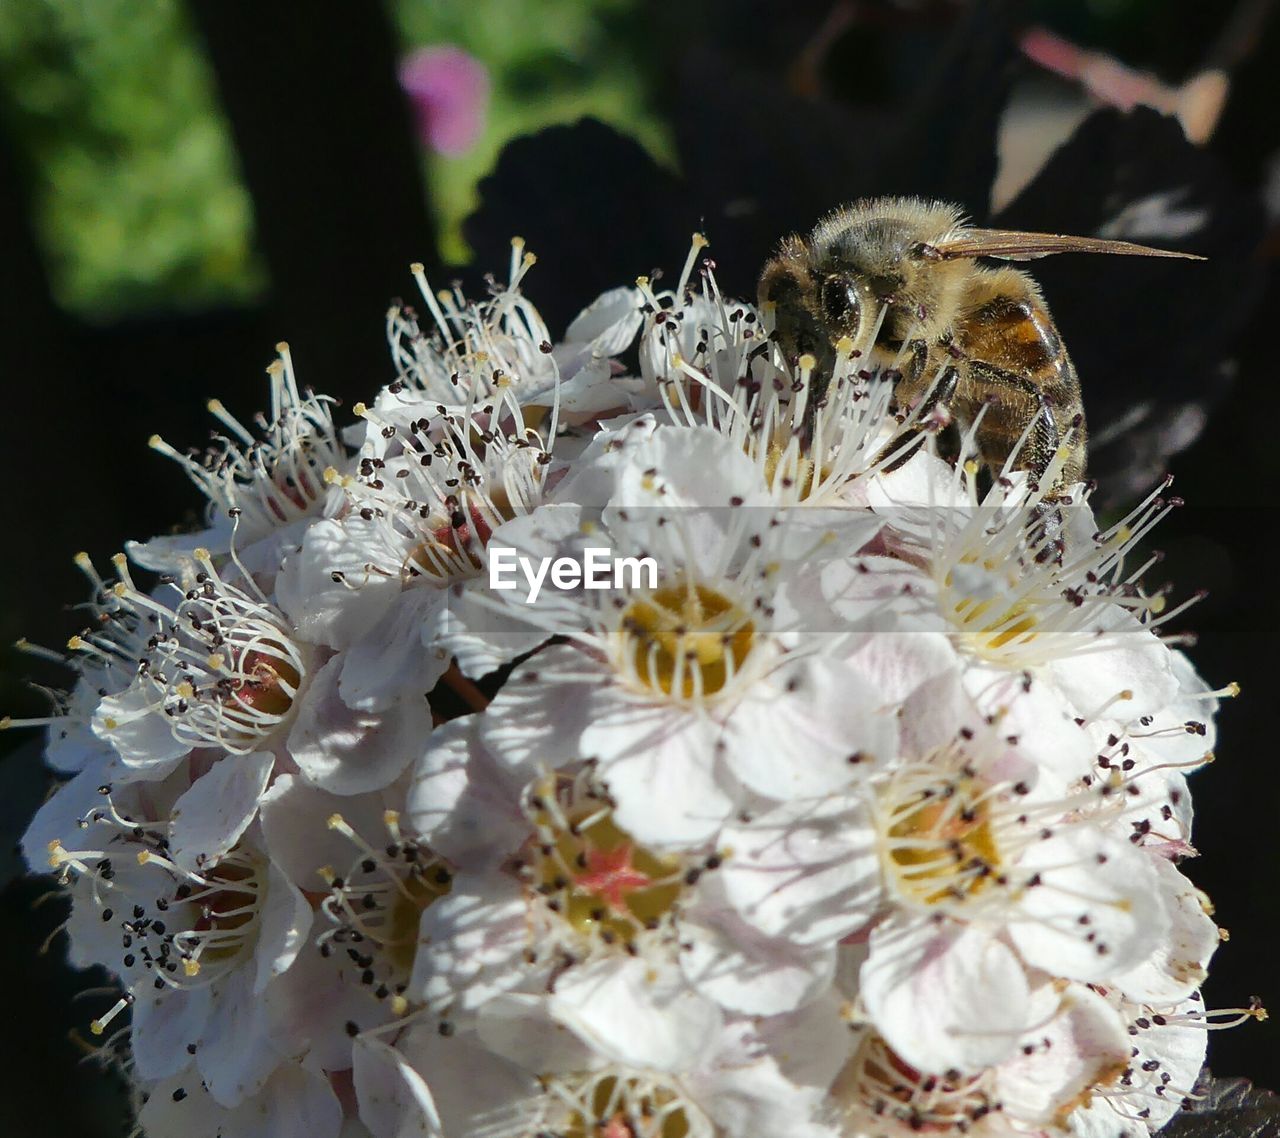 CLOSE-UP OF HONEY BEE ON WHITE FLOWERS